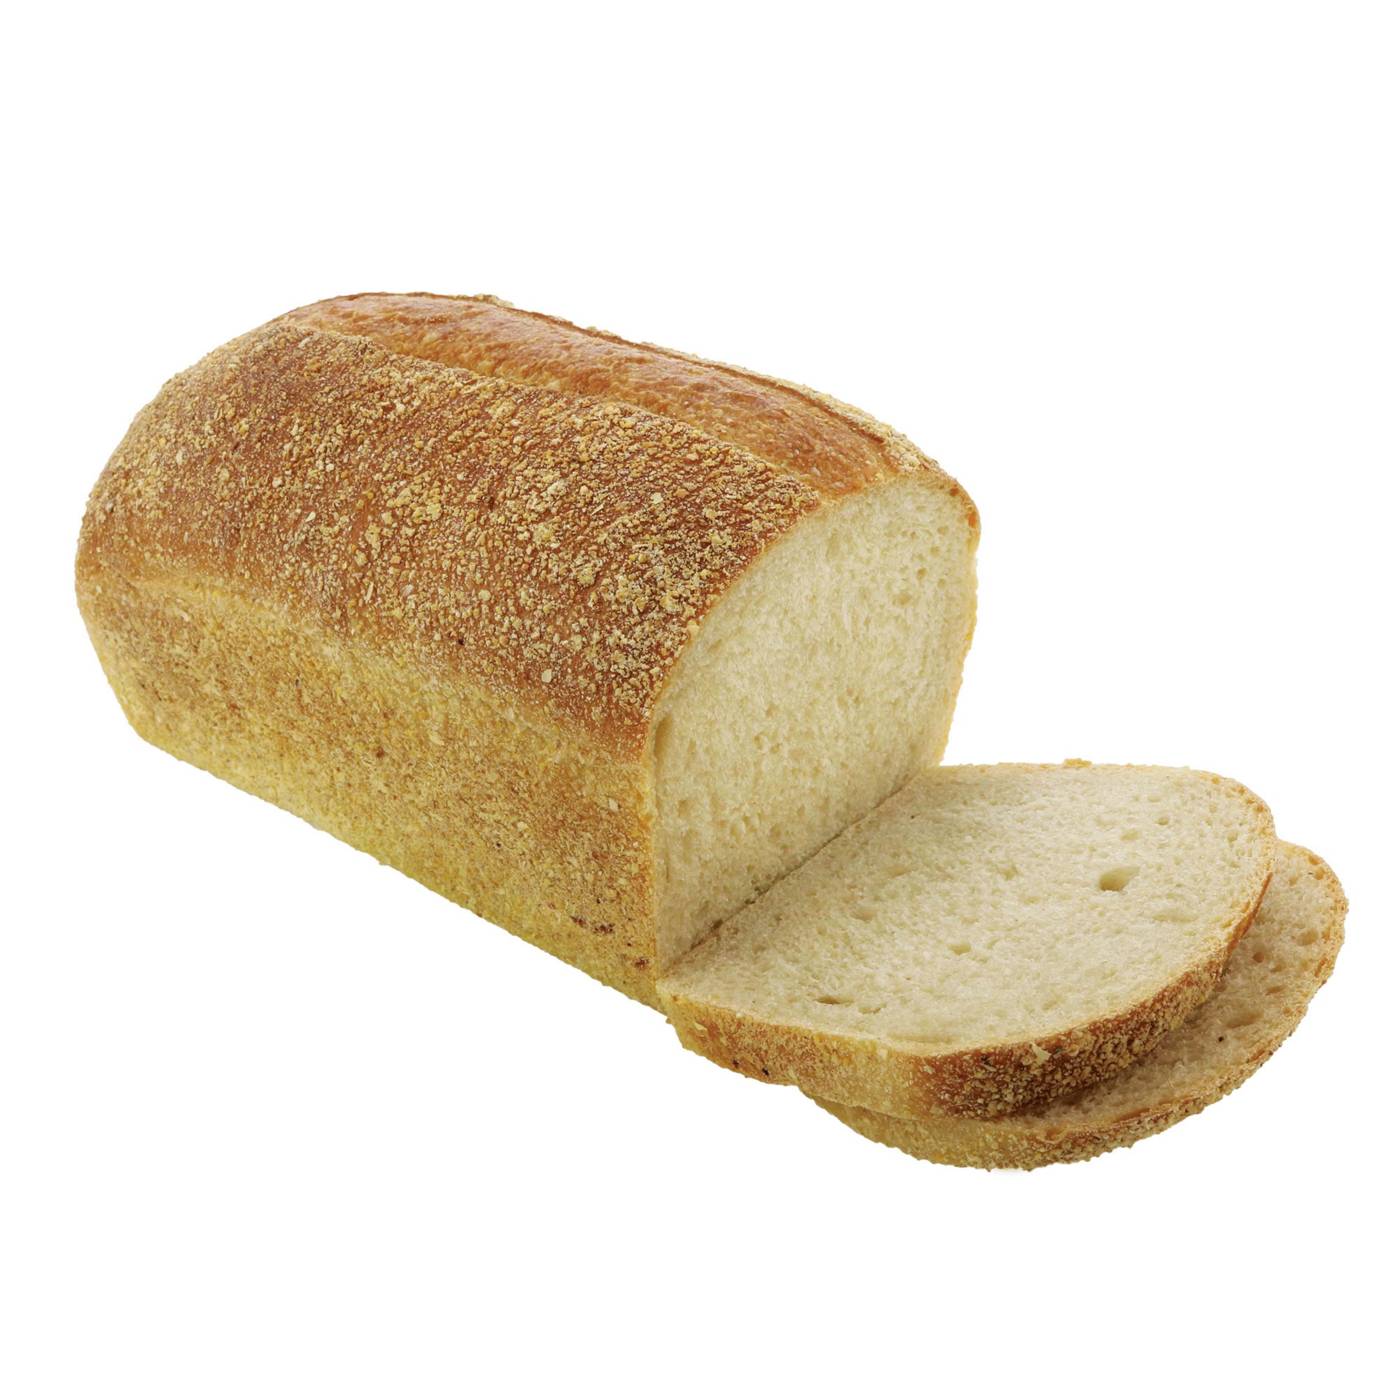 H-E-B Bakery Scratch English Toasting Bread; image 1 of 2